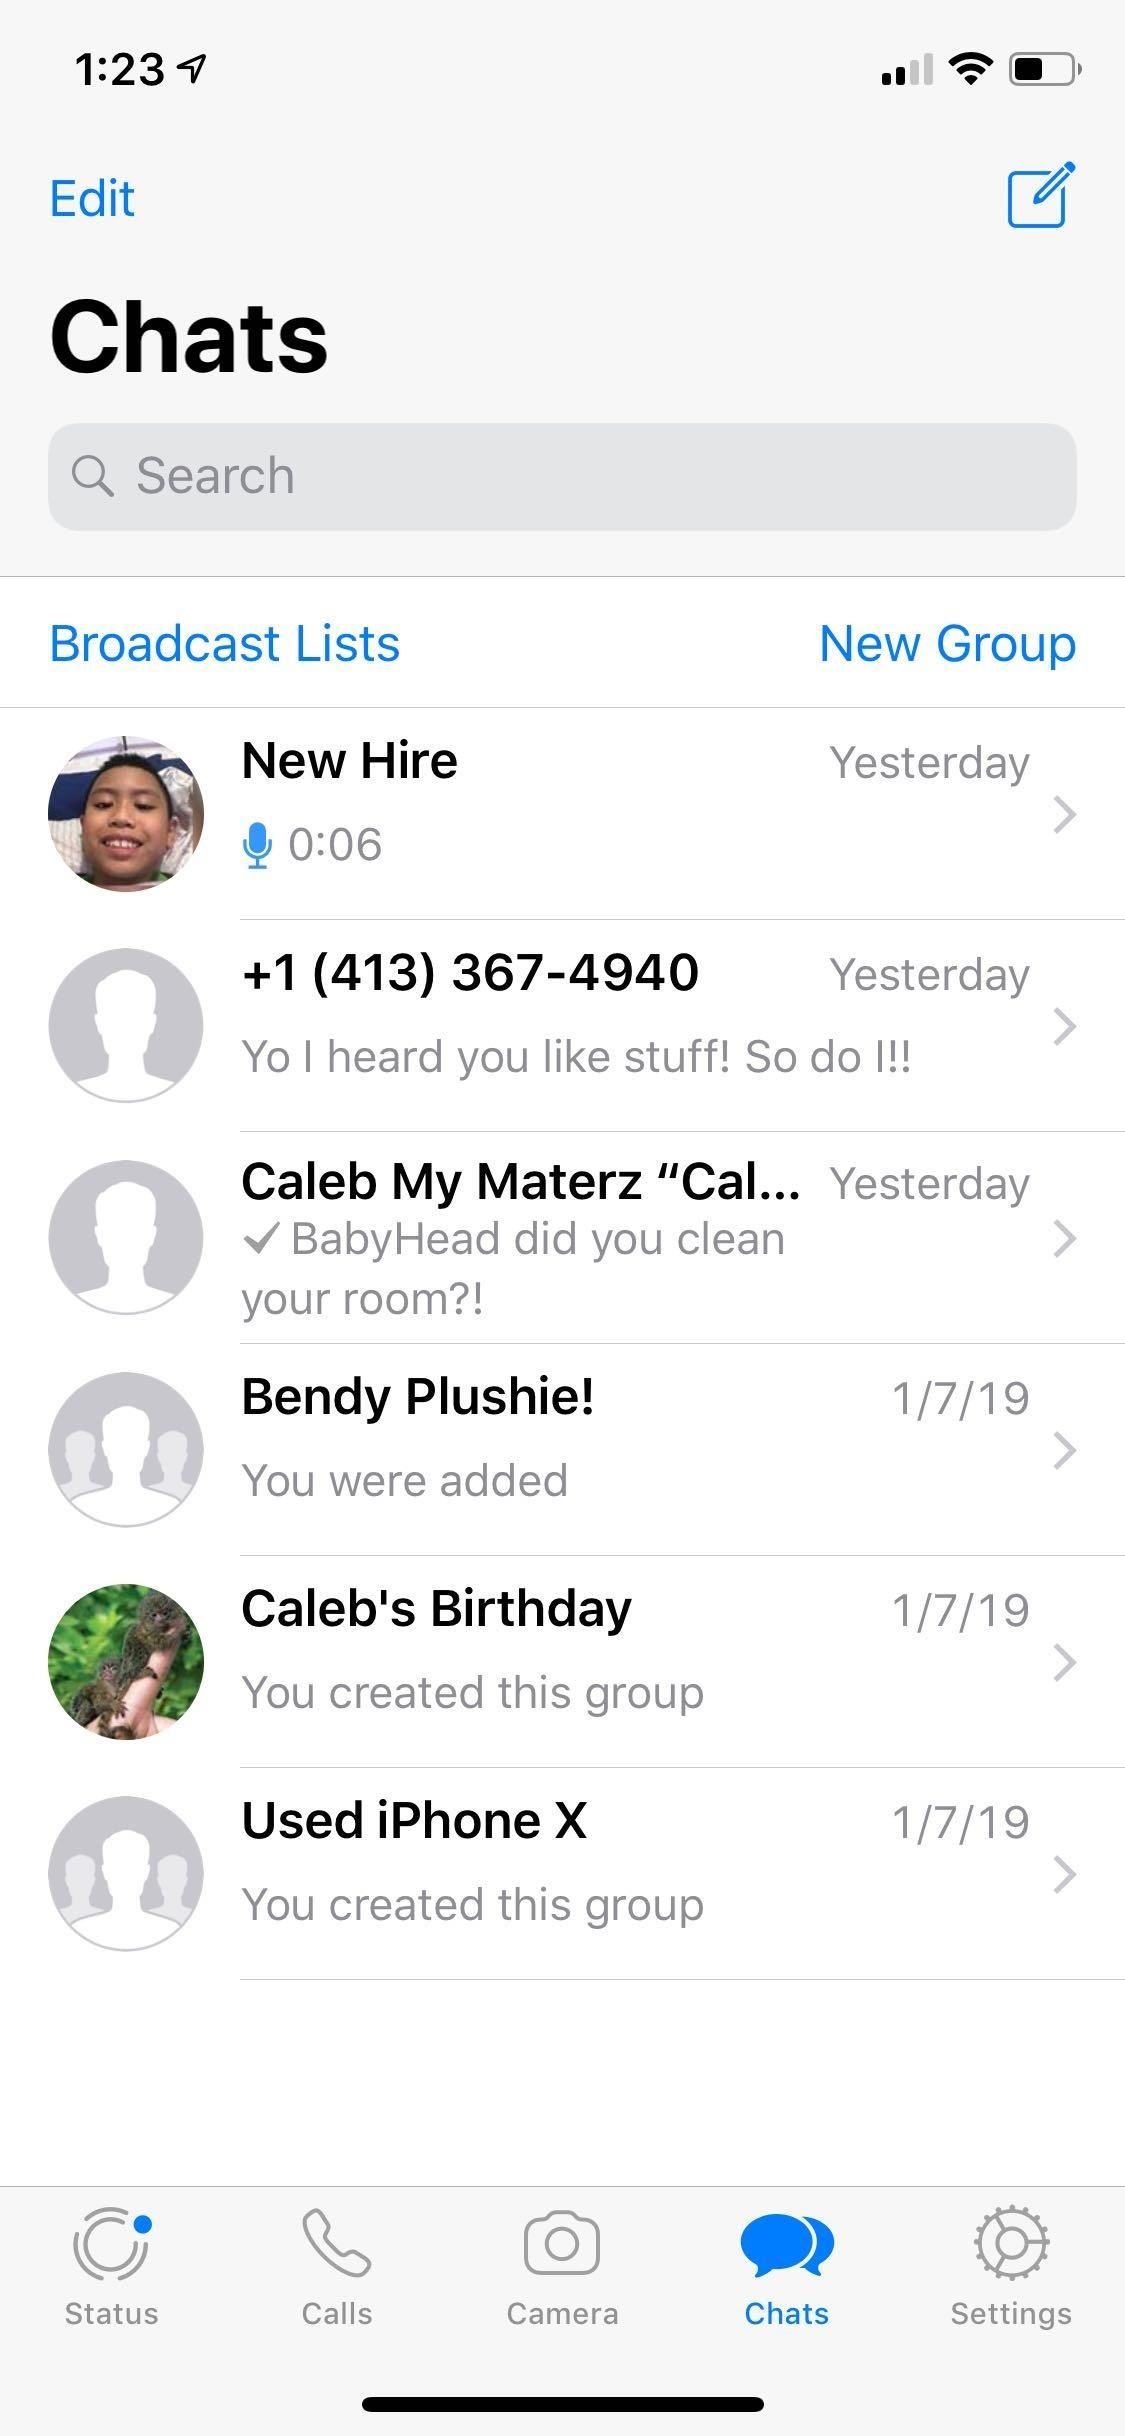 18 Hidden WhatsApp Features Everyone Should Know About